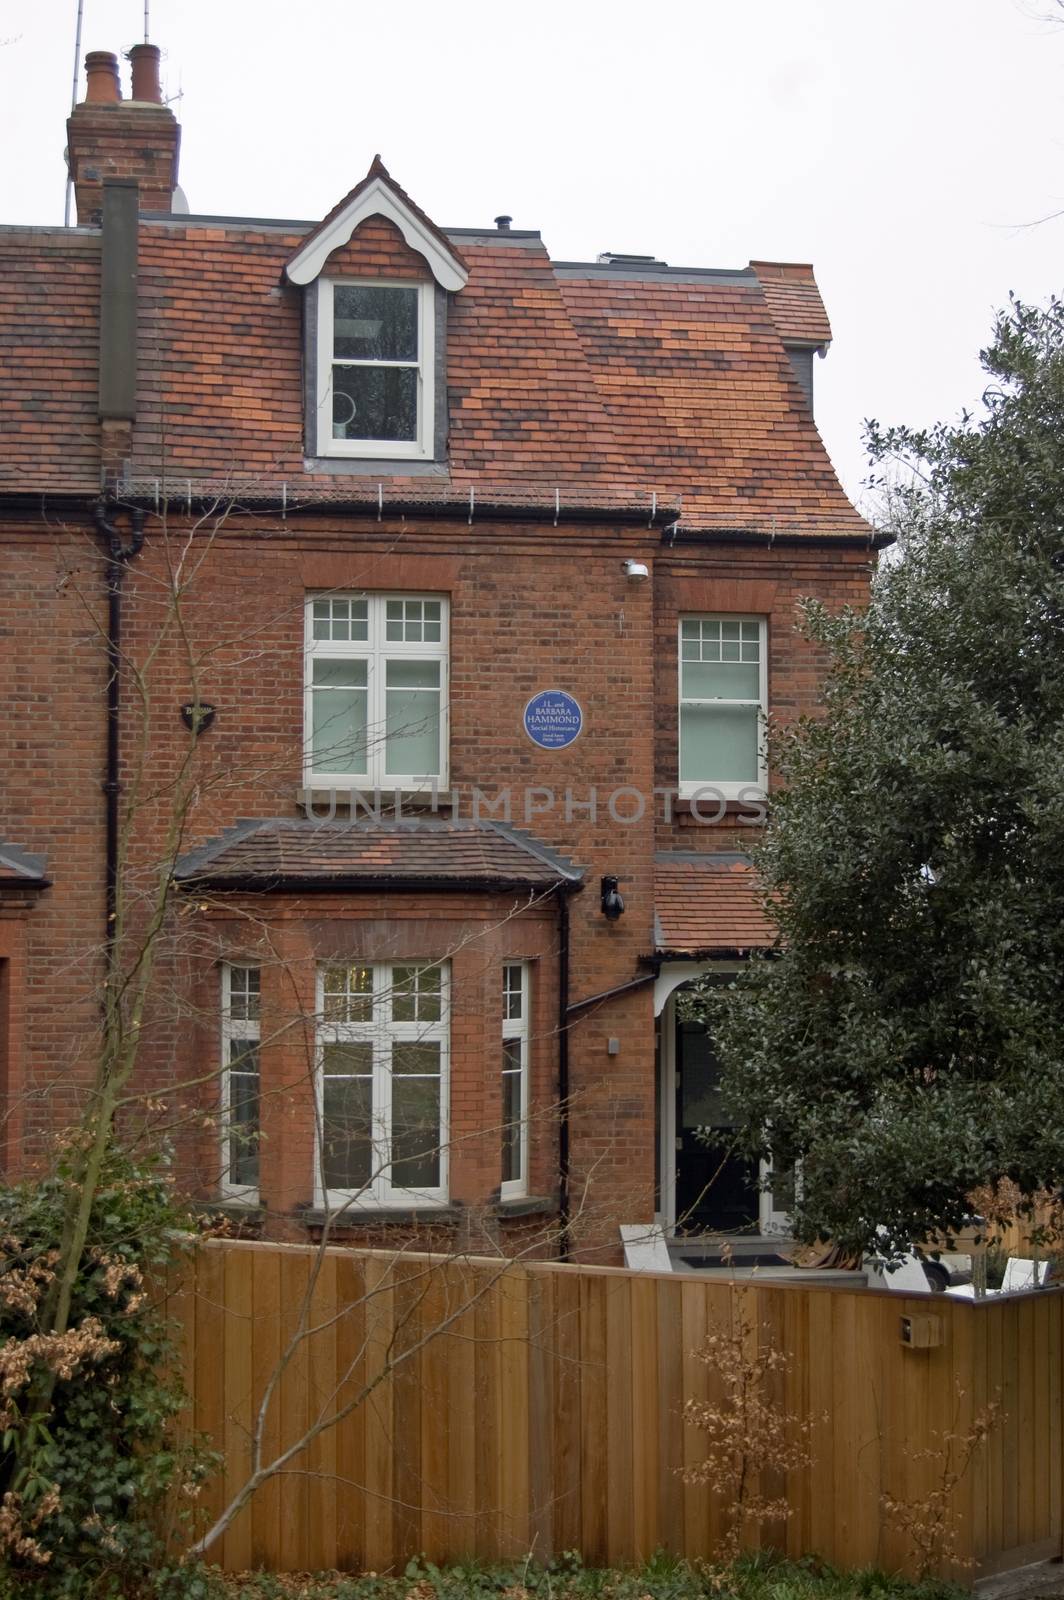 The renowned social historians J.L. and Barbara Hammond lived in this Victorian villa on the edge of Hampstead Heathbetween 1906 - 1913.